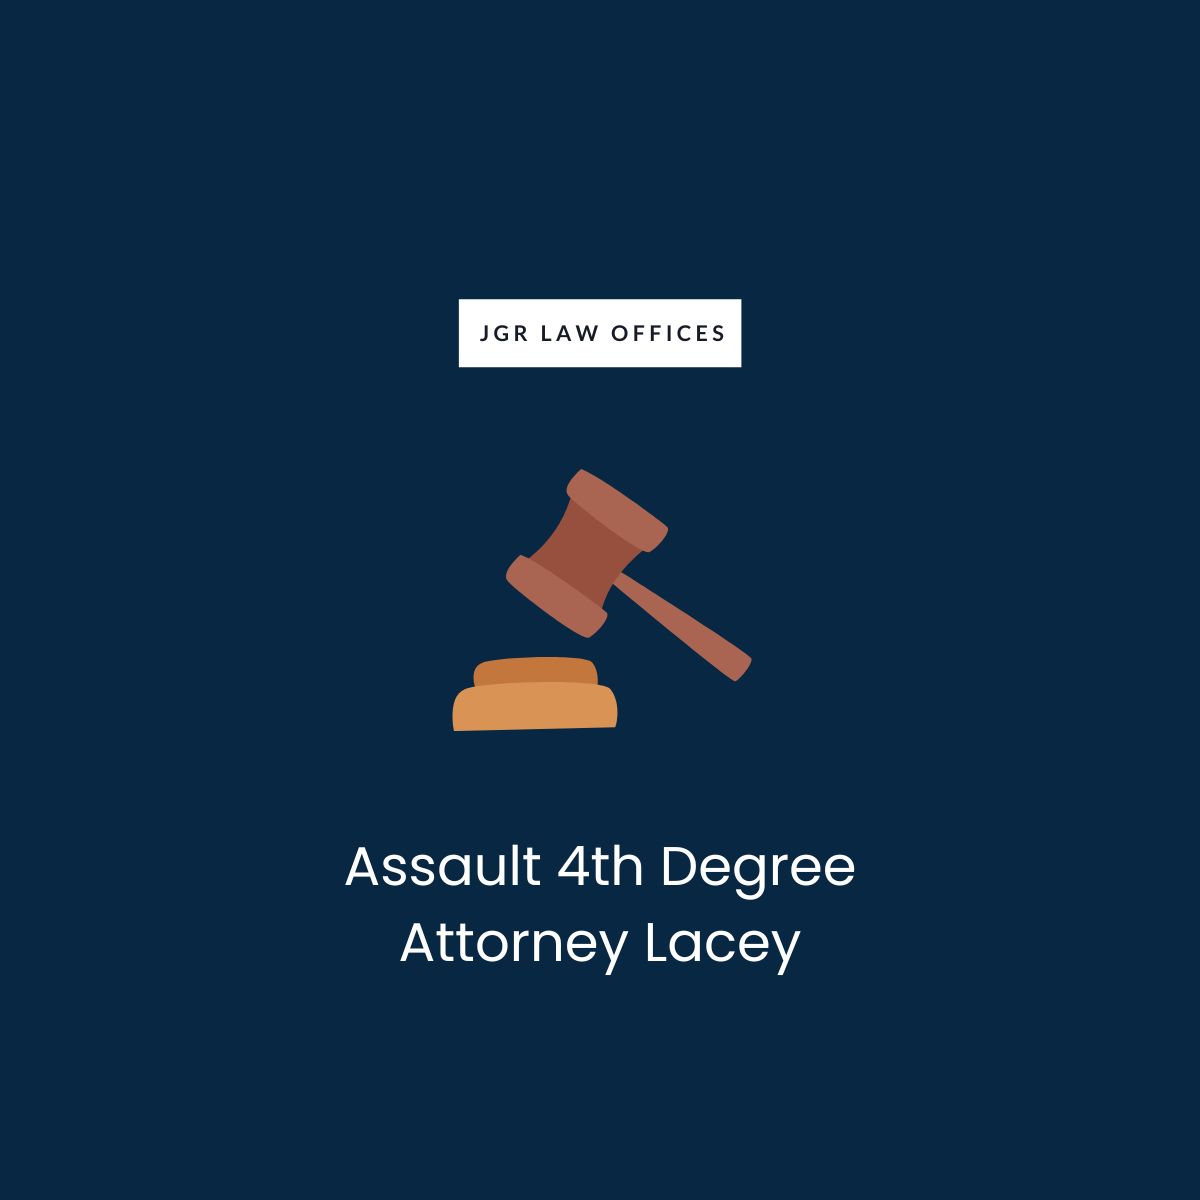 Assault 4th Degree Attorney Lacey